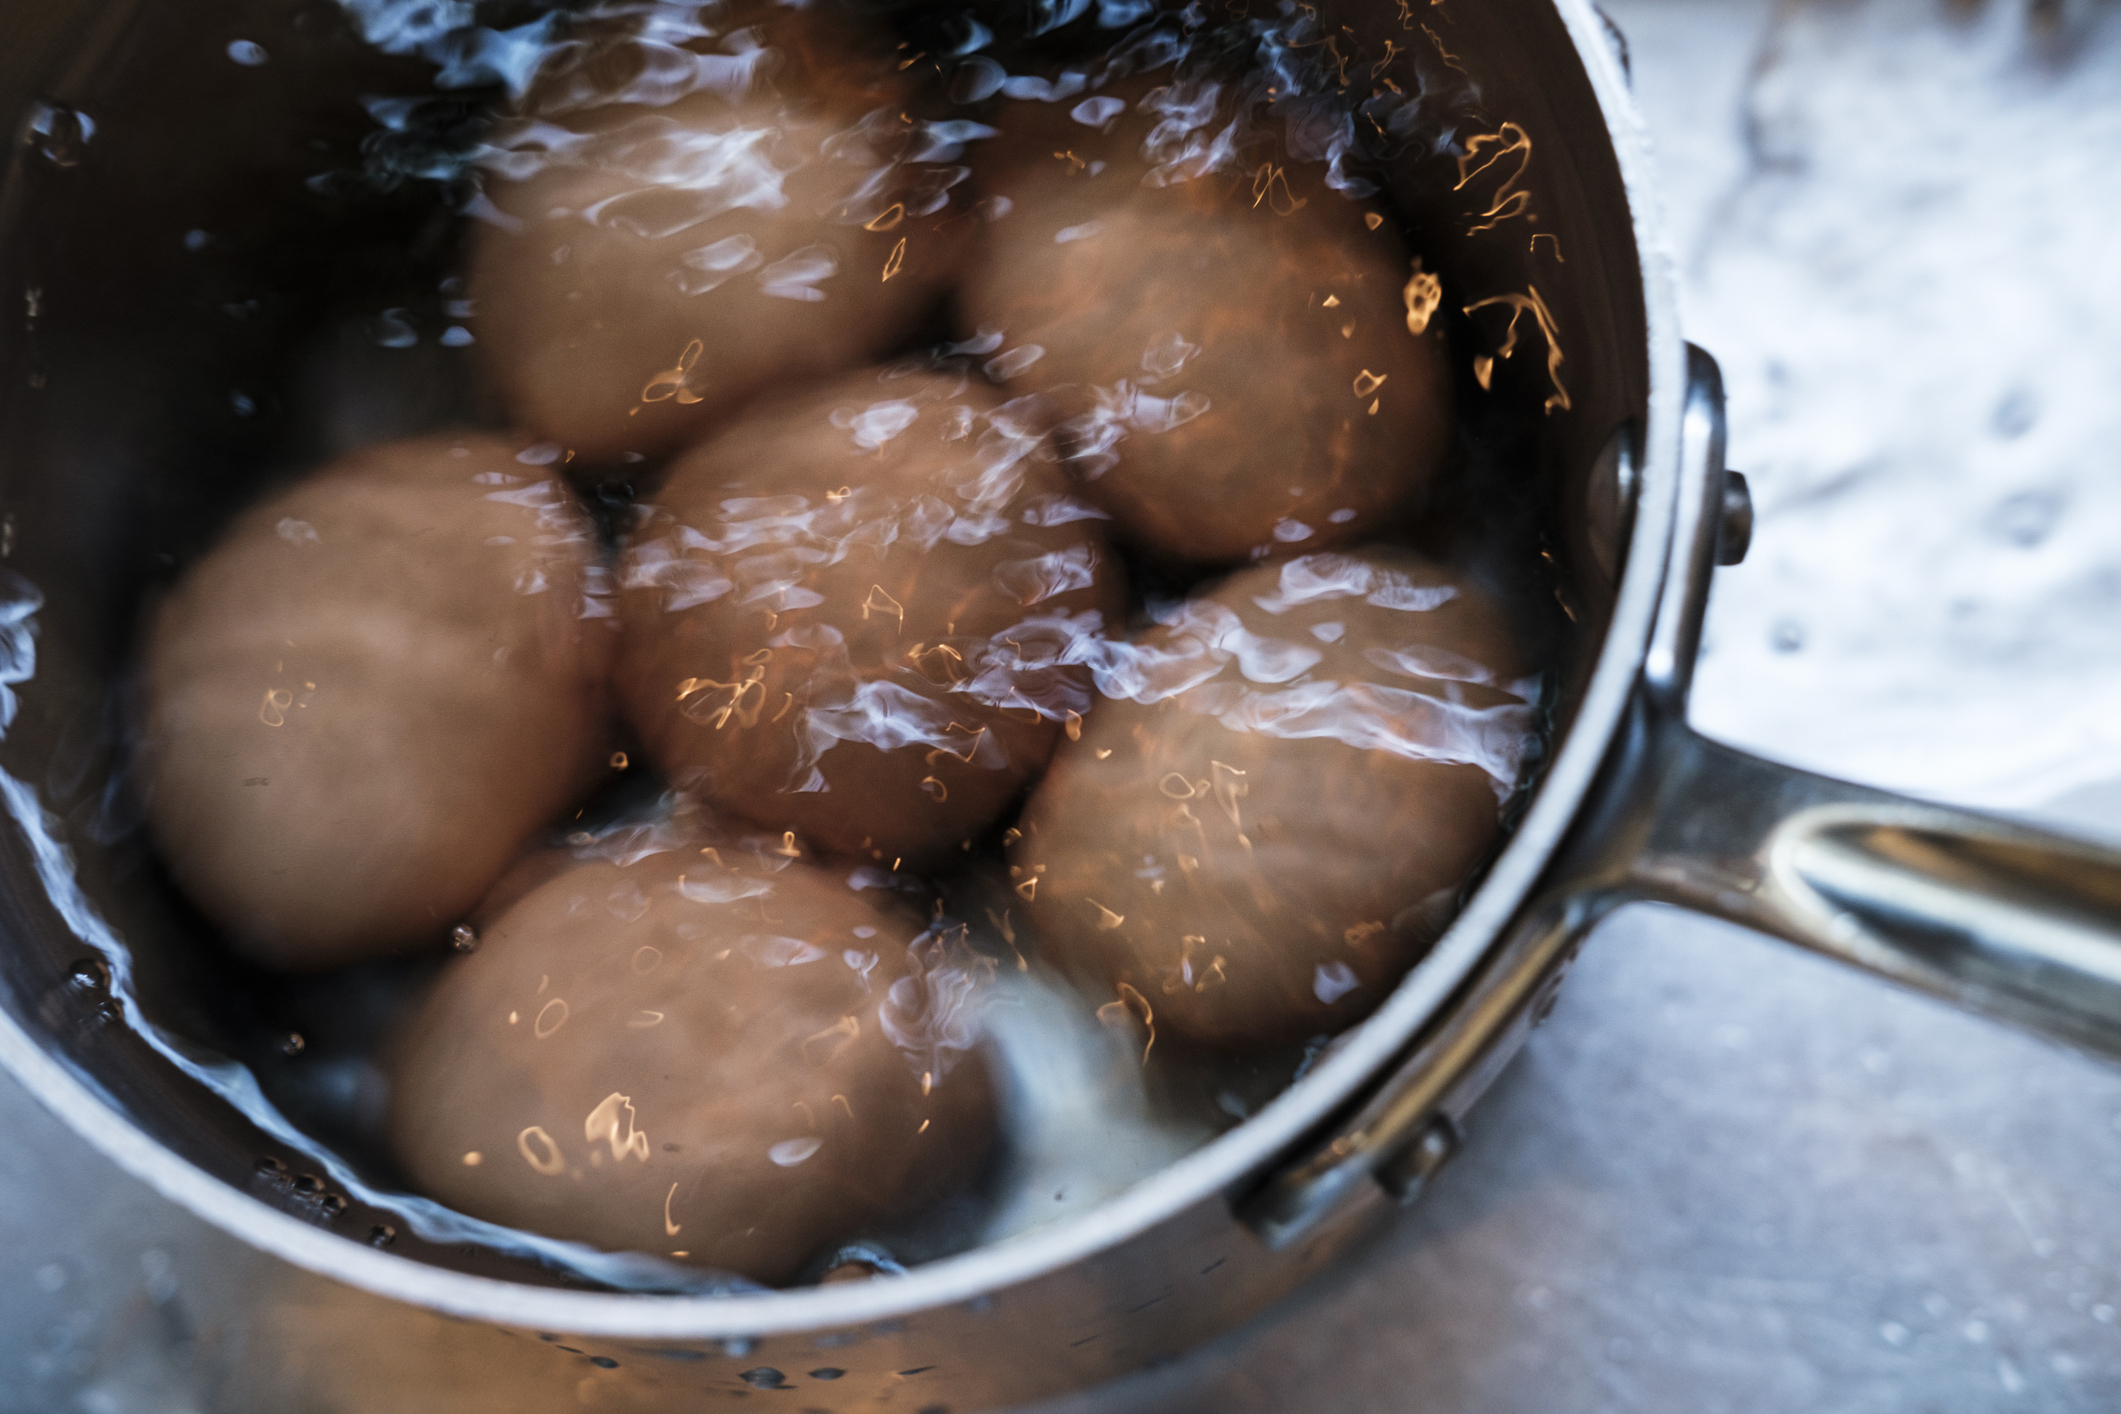 Pot with boiling eggs, steam rising, close-up view